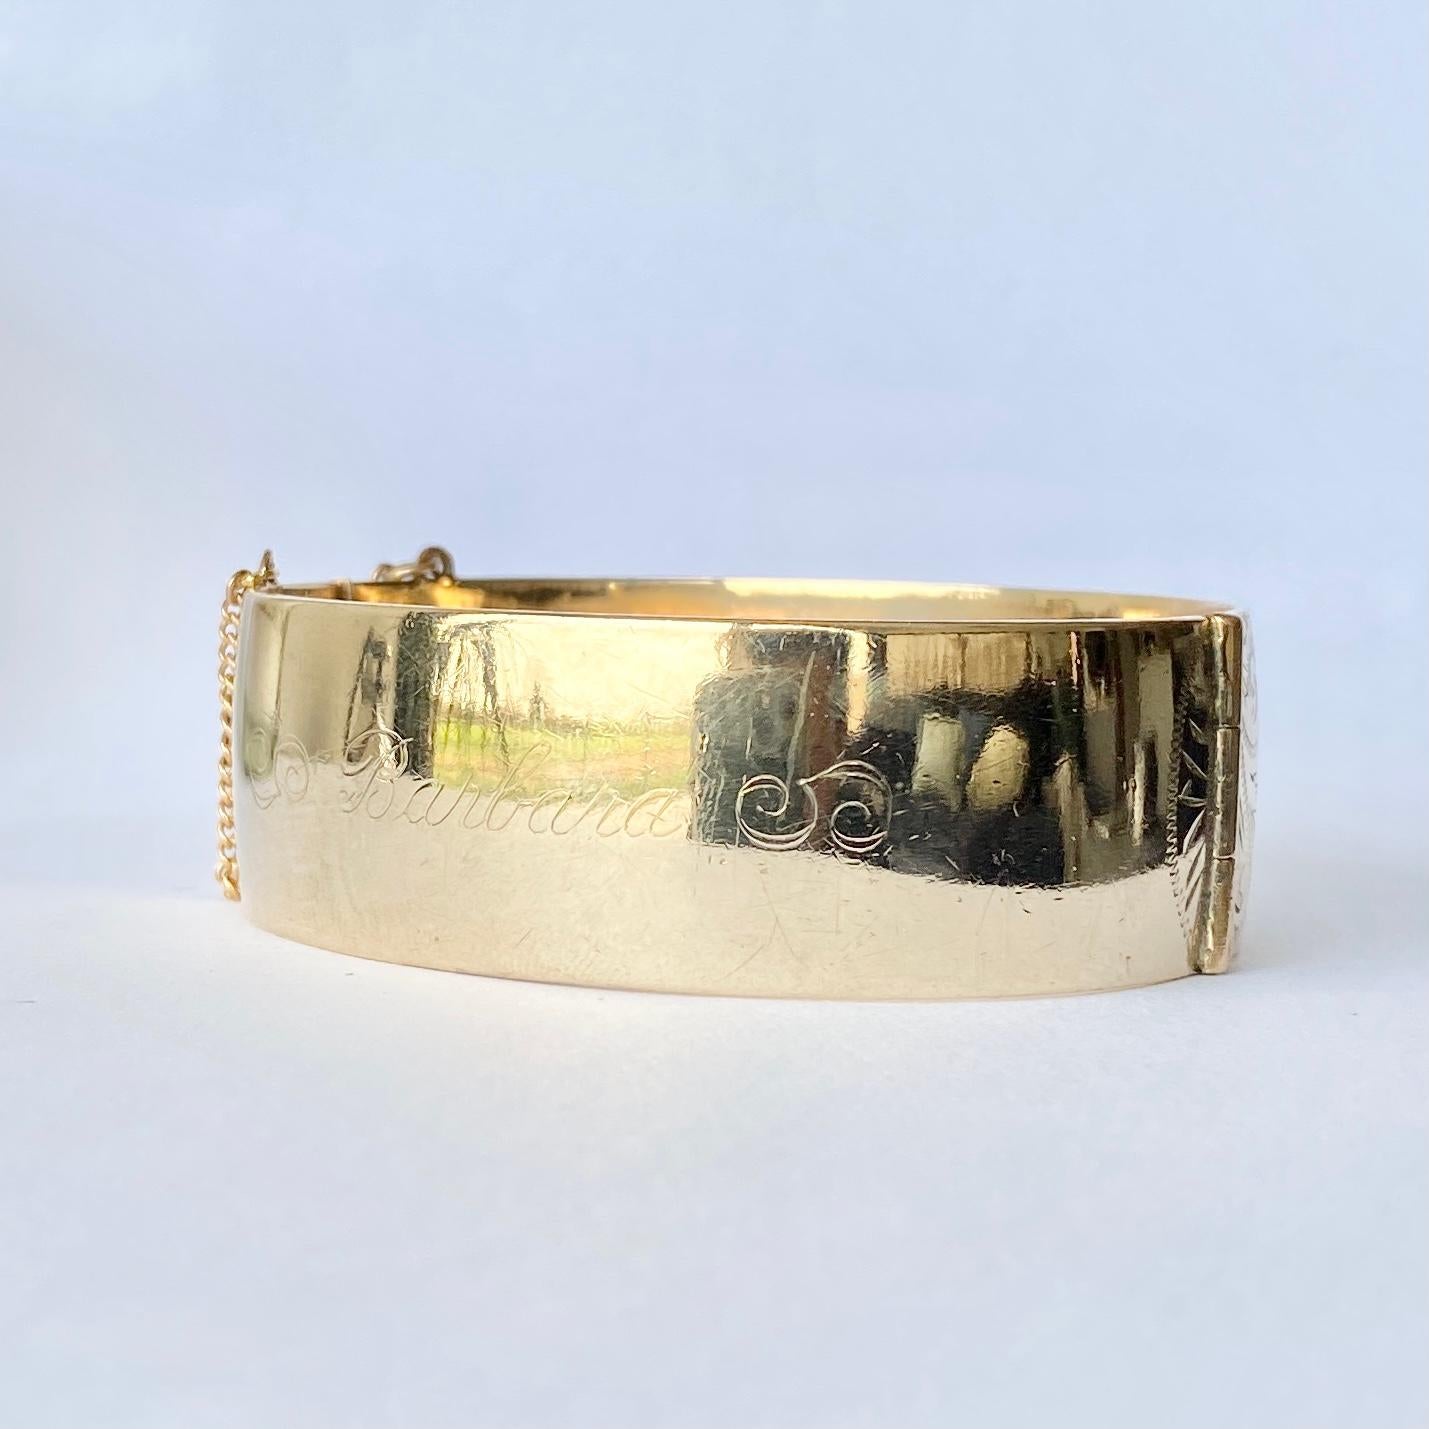 This  Liberty of London bangle is a classic design with fine swirl and leaf engraving on one half of the bangle. The bangle is modelled in 9ct gold with metal core and is hallmarked L&co. The back of the bangle has faint engraving which reads